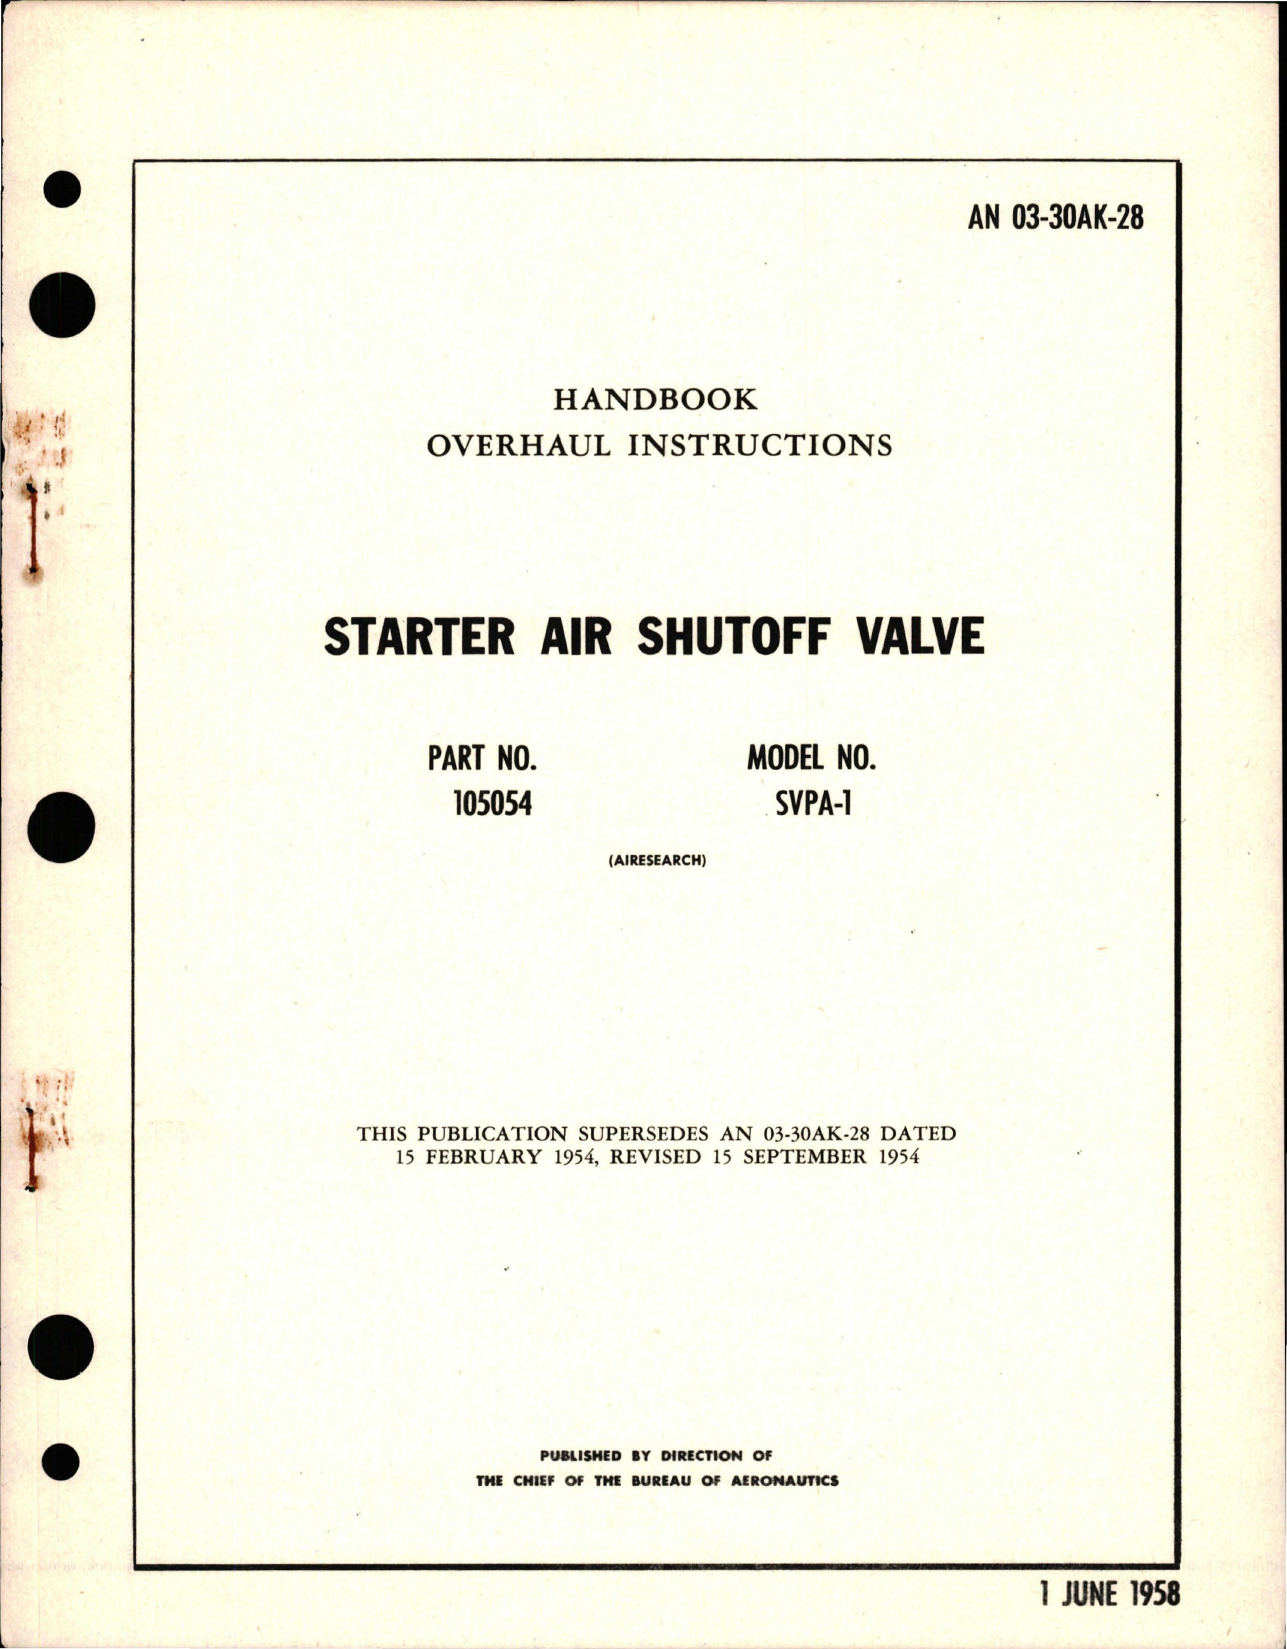 Sample page 1 from AirCorps Library document: Overhaul Instructions for Starter Air Shutoff Valve - Part 105054 - Model SVPA-1 